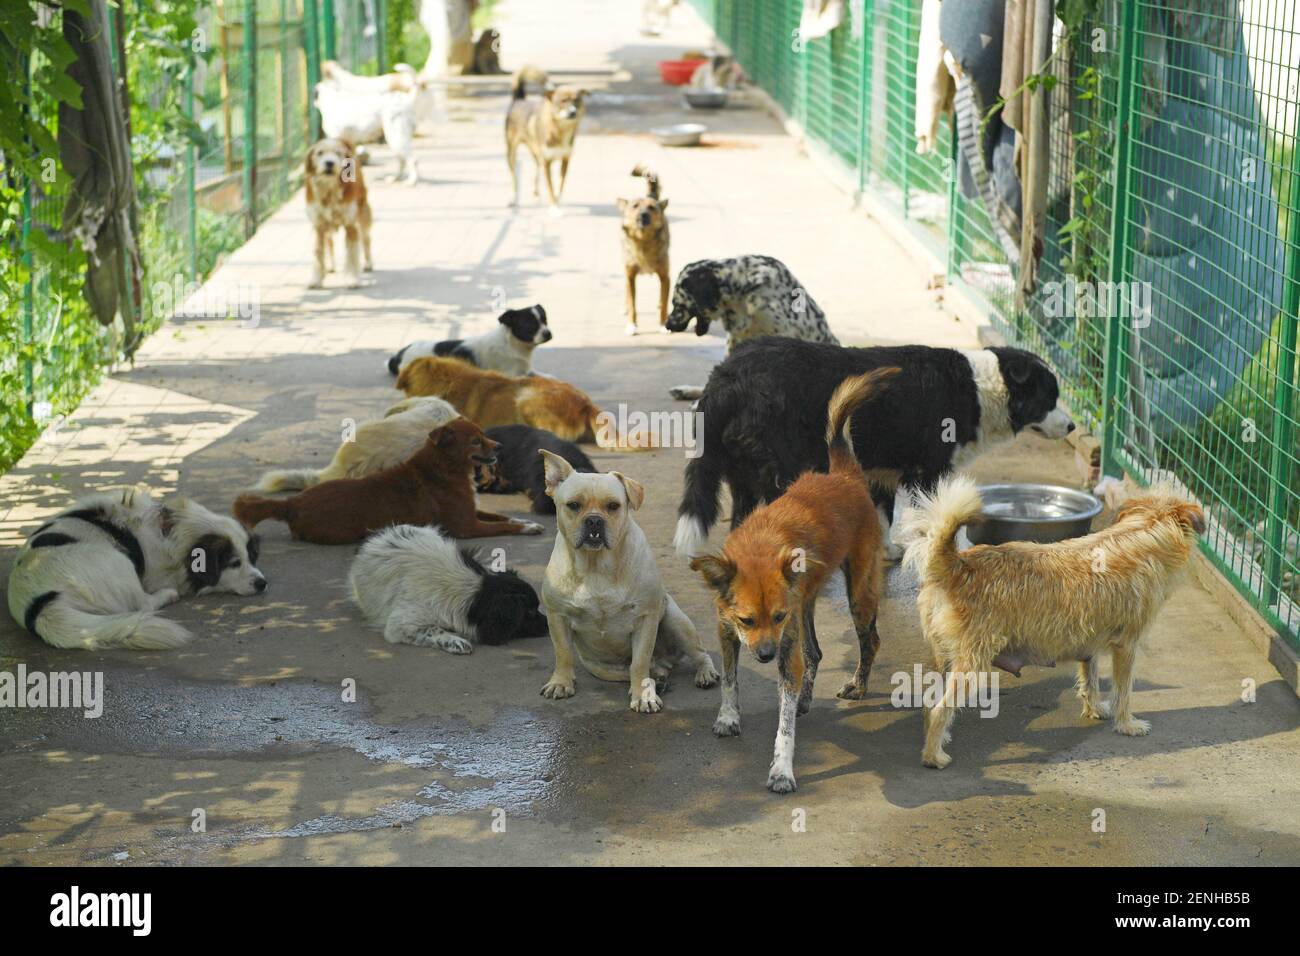 Dogs adopted by Hu Xiuping in Hefei city, east China's Anhui province, 21  August 2019. Hu Xiuping, a lady in her sixties, adopts over 600 stray dogs  and 30 cats in Hefei